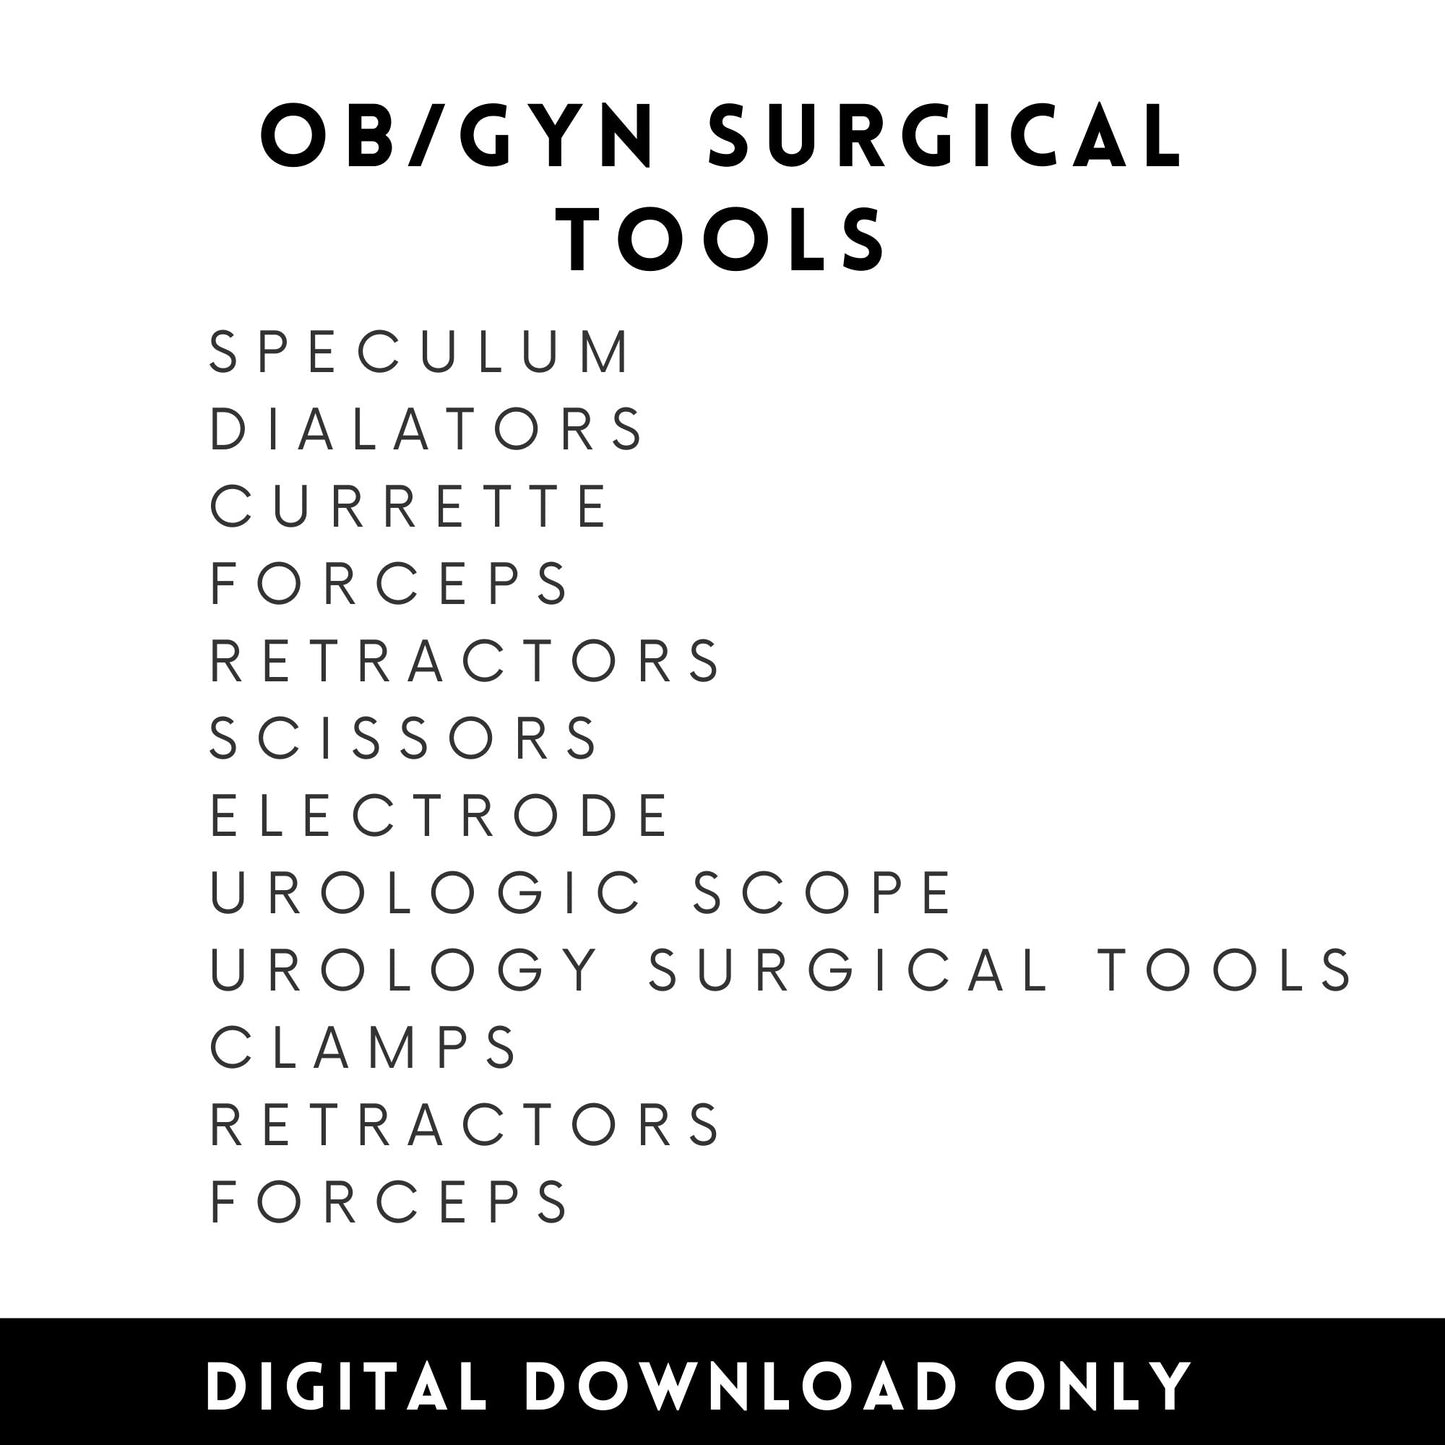 OBGyn Obstetric Gynecology surgical instruments tools flashcards OR Operating Room Surgery rotation Surgical Tech clinical Medical student